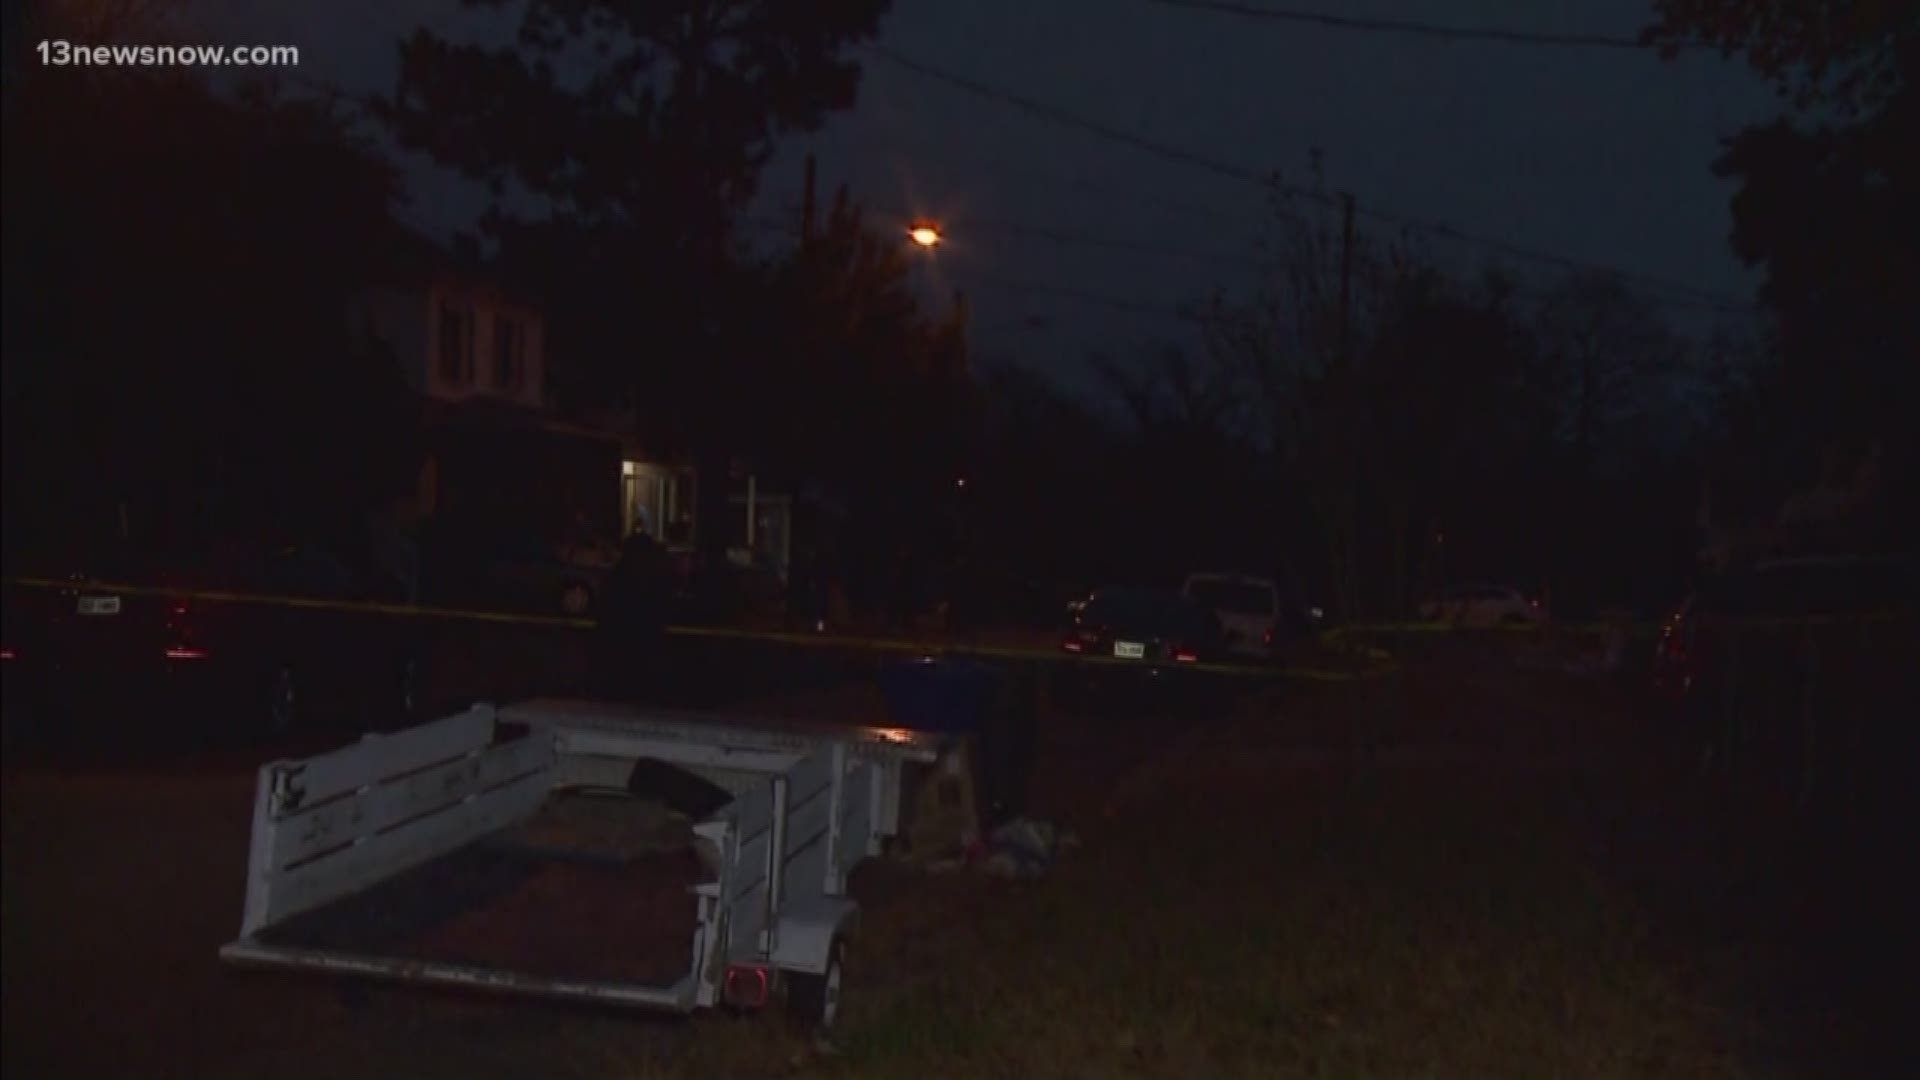 A man from Newport News is dead after police received a call of shots fired on 24th Street.